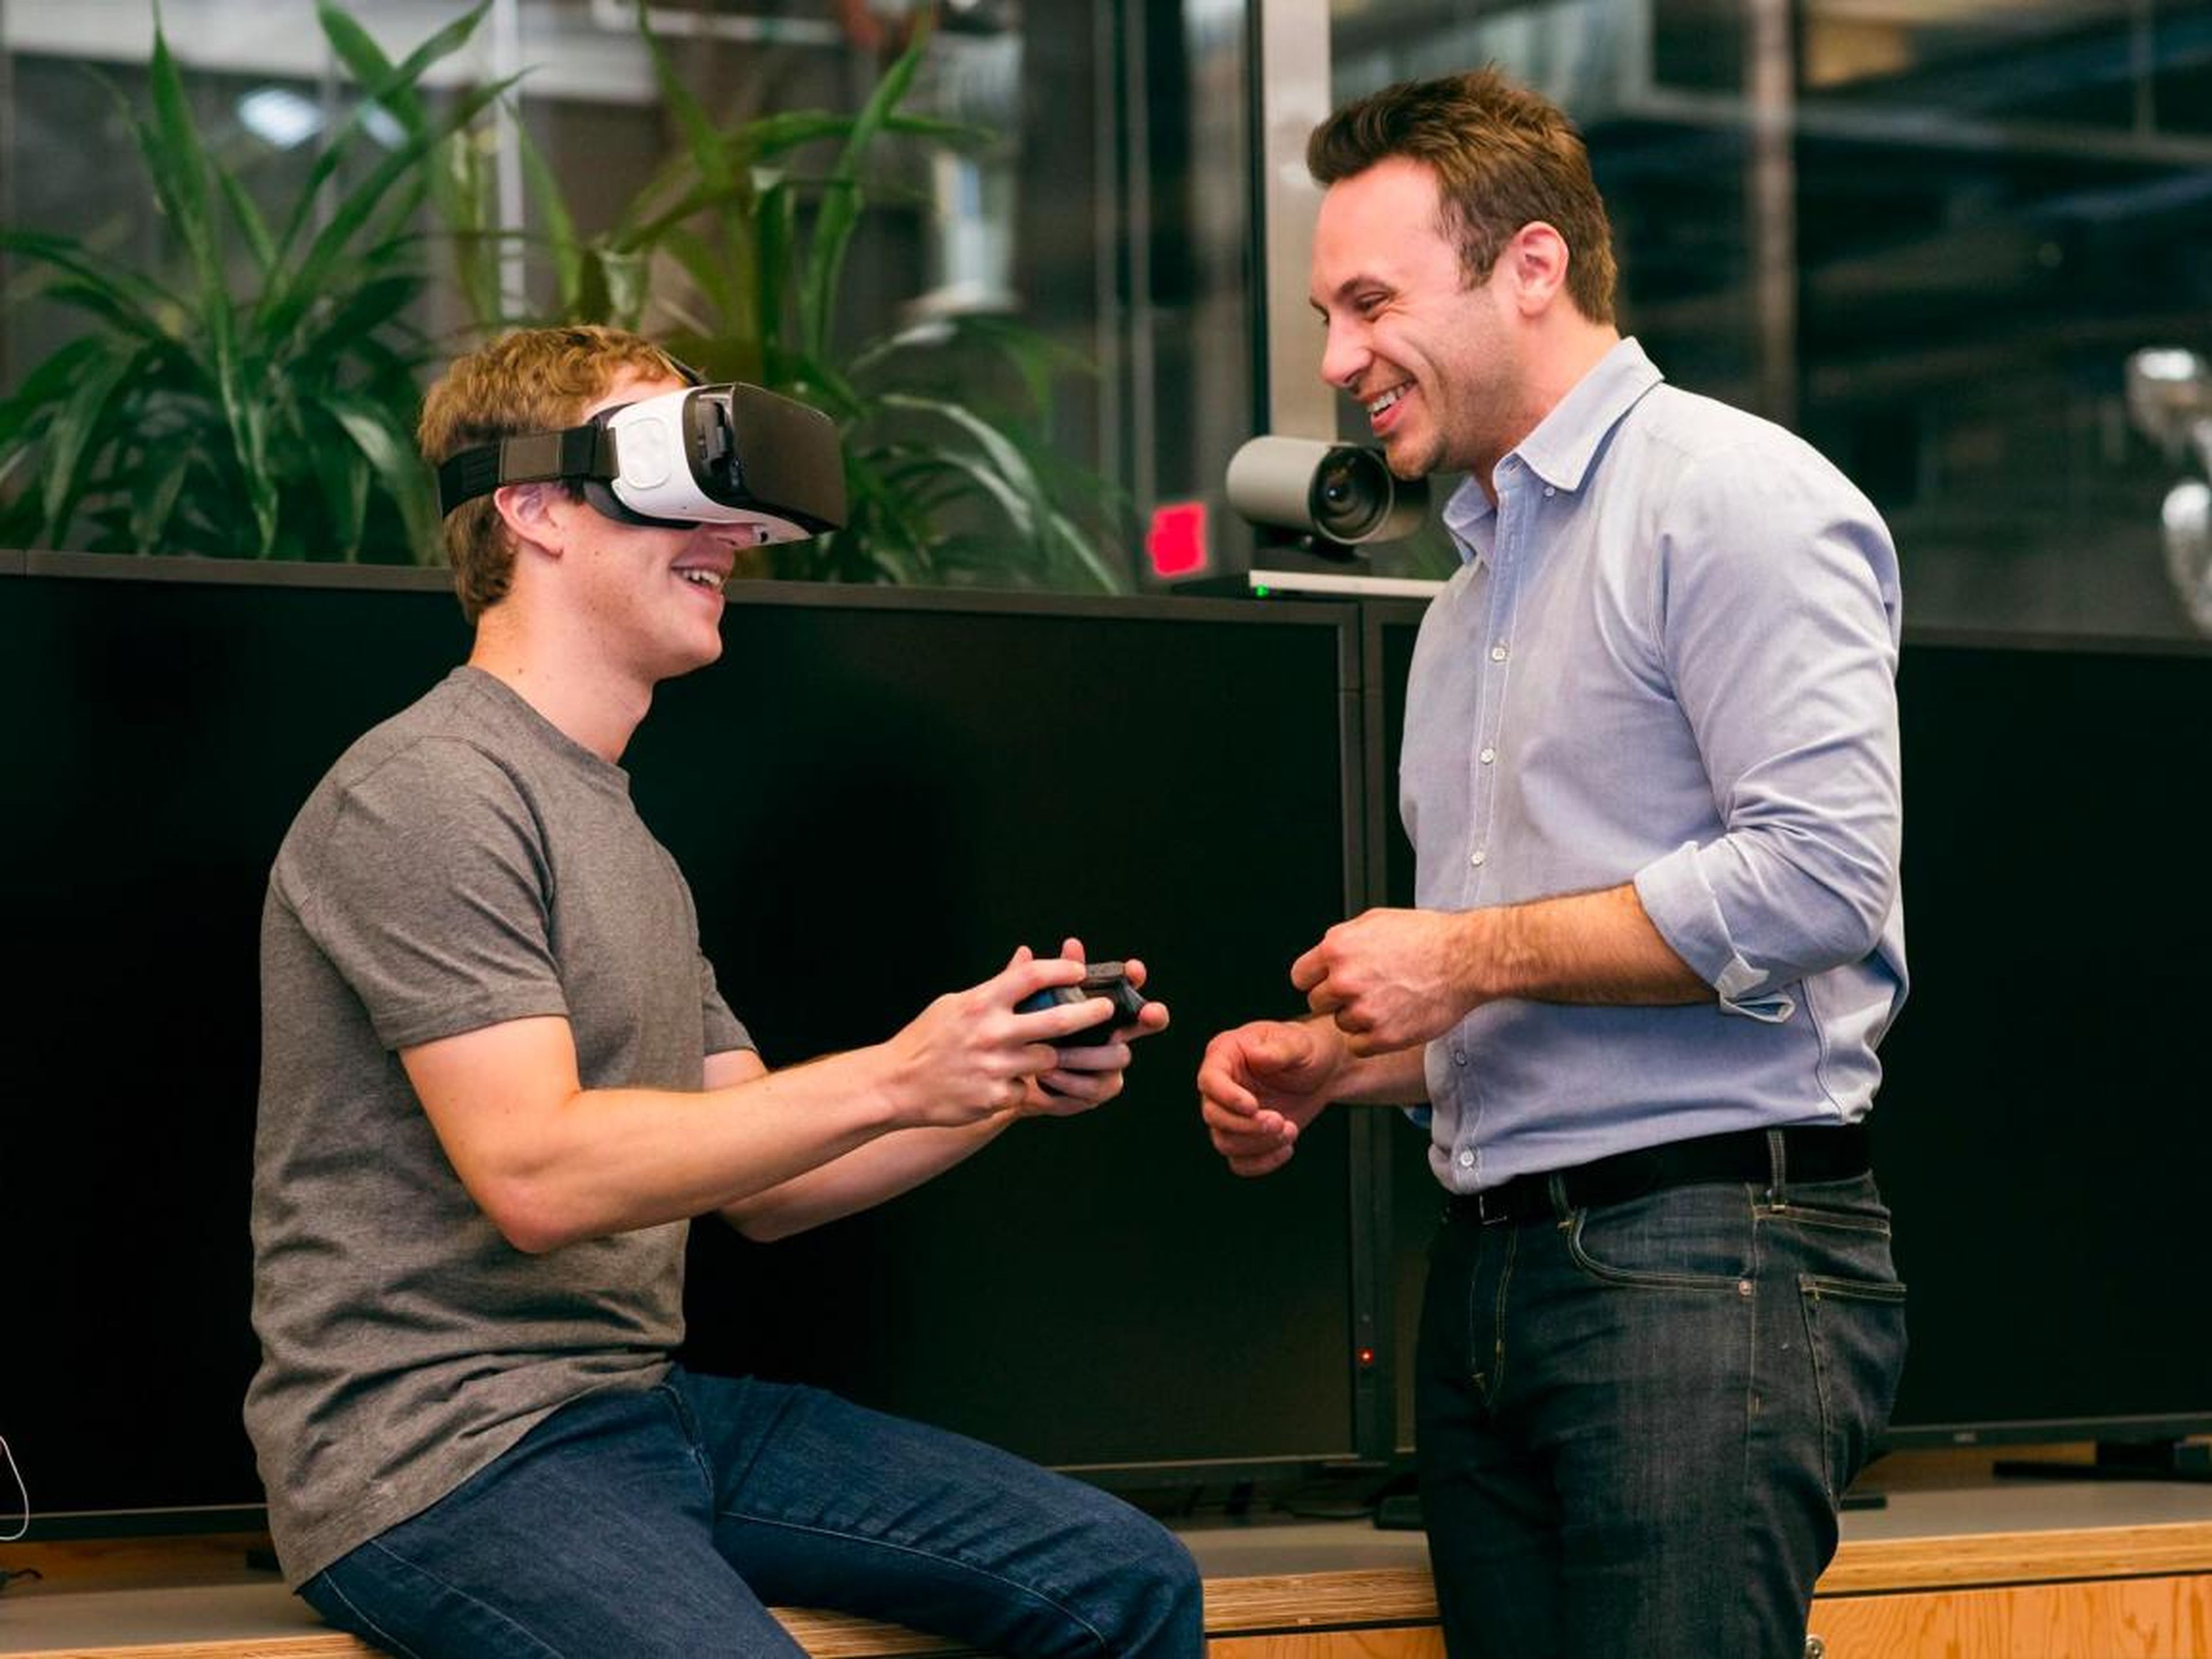 October 2018: Oculus CEO and cofounder Brendan Iribe, who left after 4 years of heading up Facebook's efforts in VR.